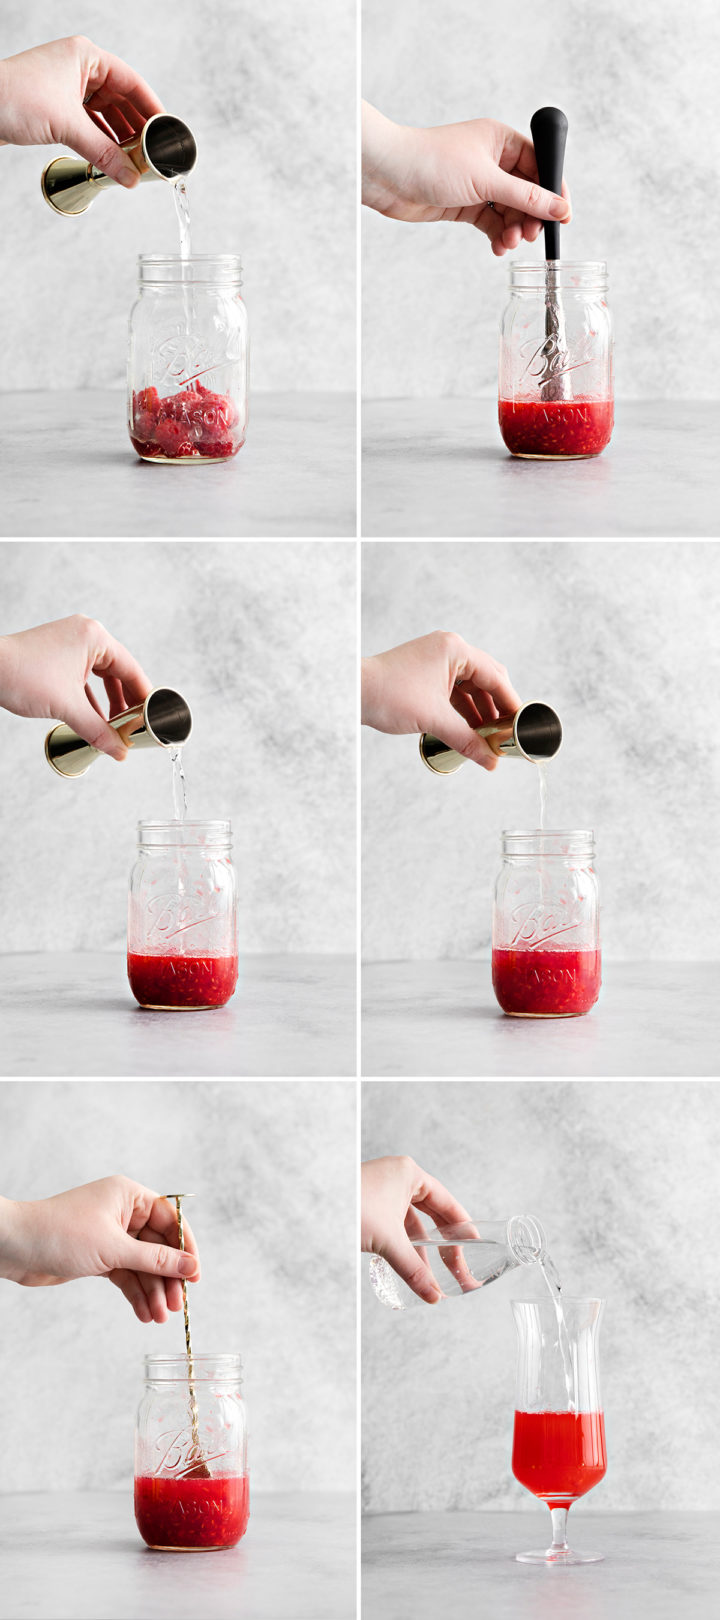 step by step photos showing how to make a gin spritz with raspberries